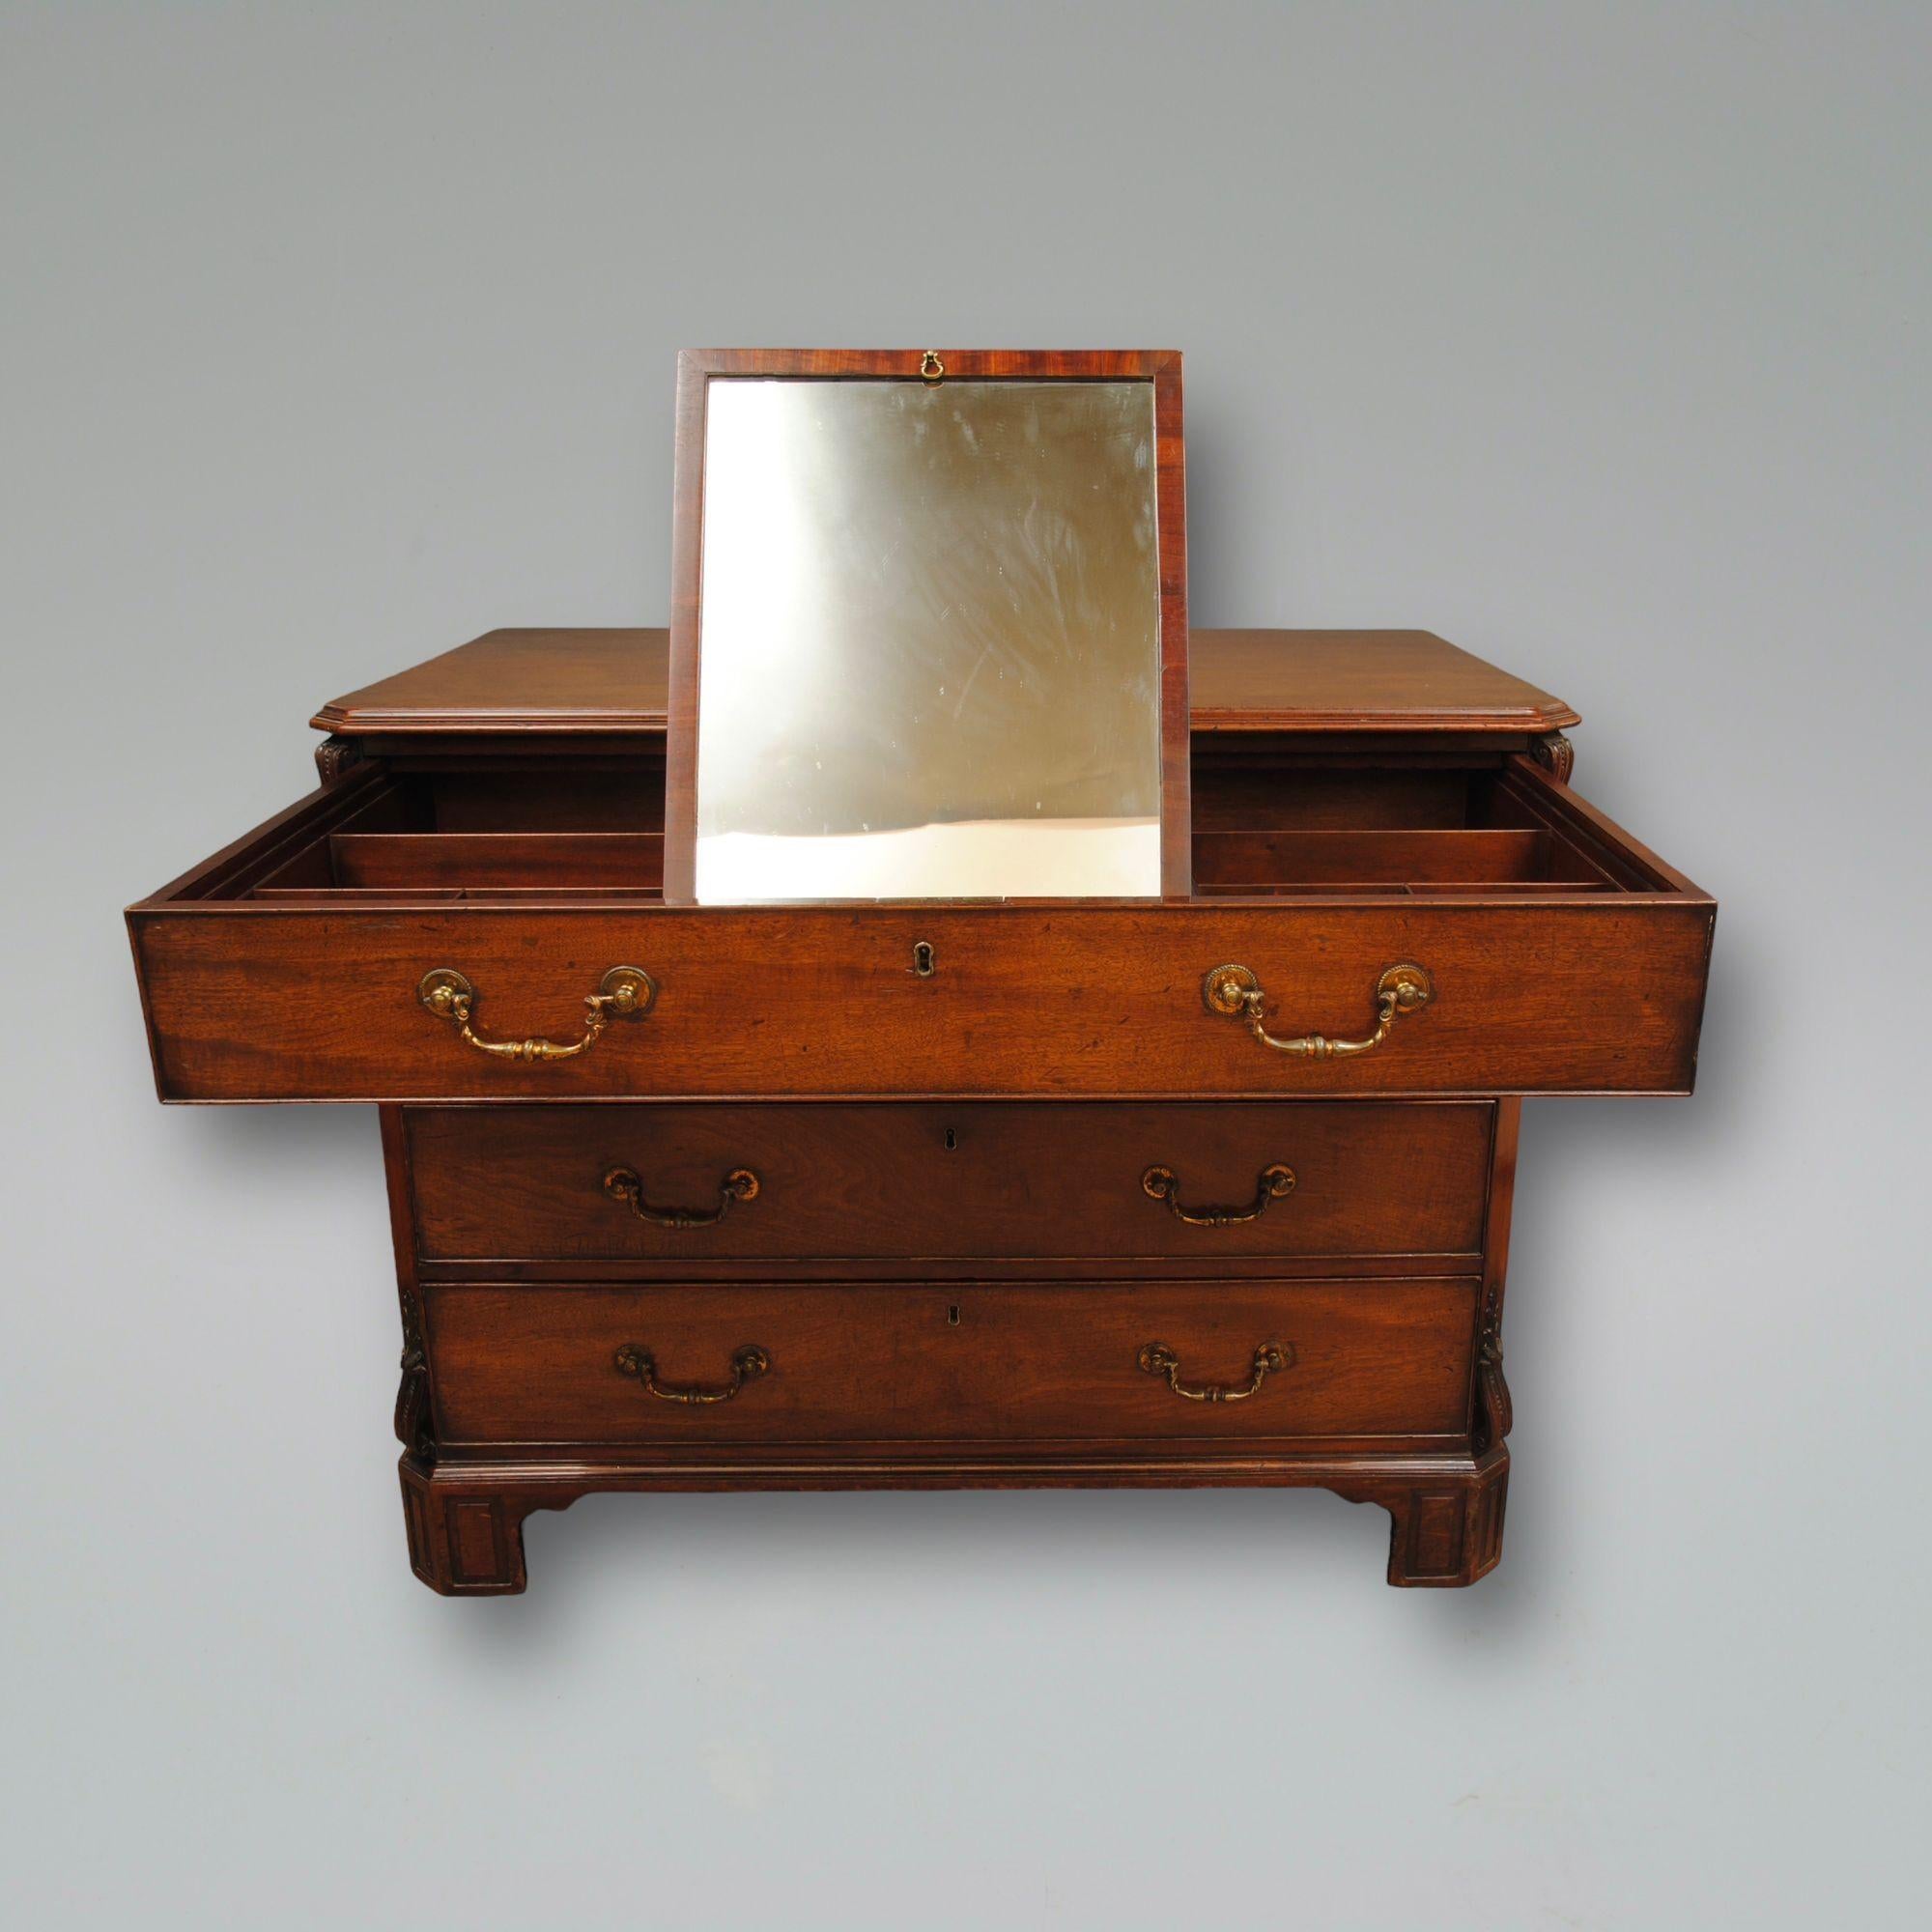 A fine 18th century mahogany gentleman's dressing chest. 
The top drawer with a baized slide opening to reveal a fitted interior with a mirror and two hidden drawers at the back.
The original brass handles on the drawer fronts retain some of the